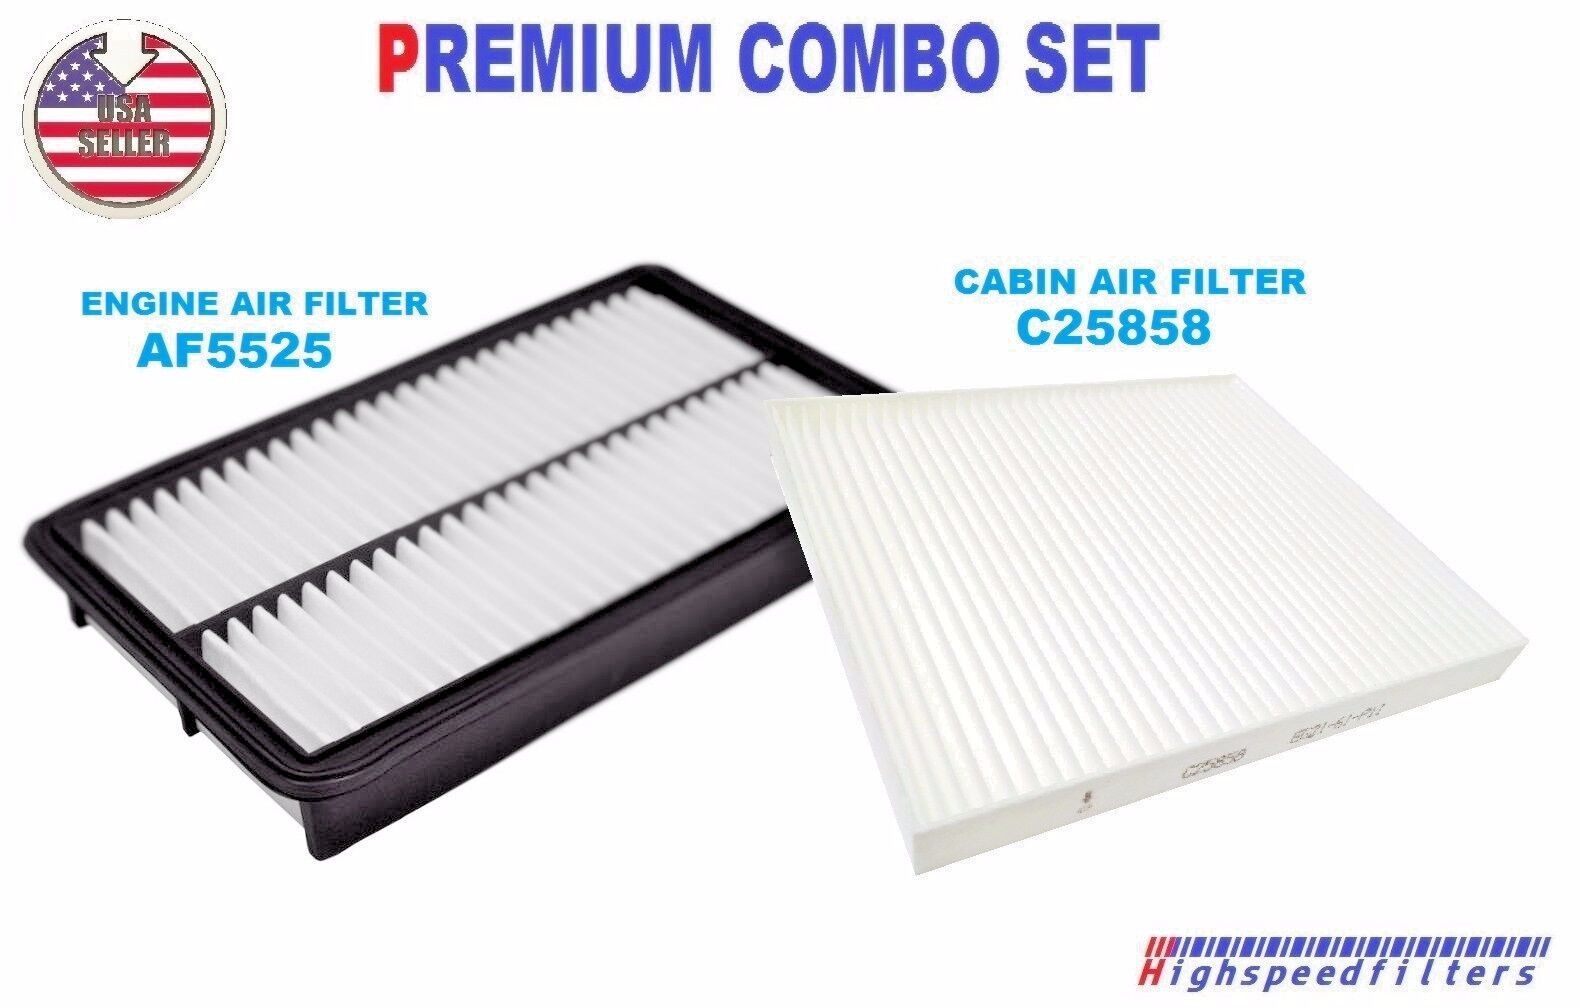 COMBO SET Air Filter & Cabin Air Filter For 2007-2012 MAZDA CX-7 